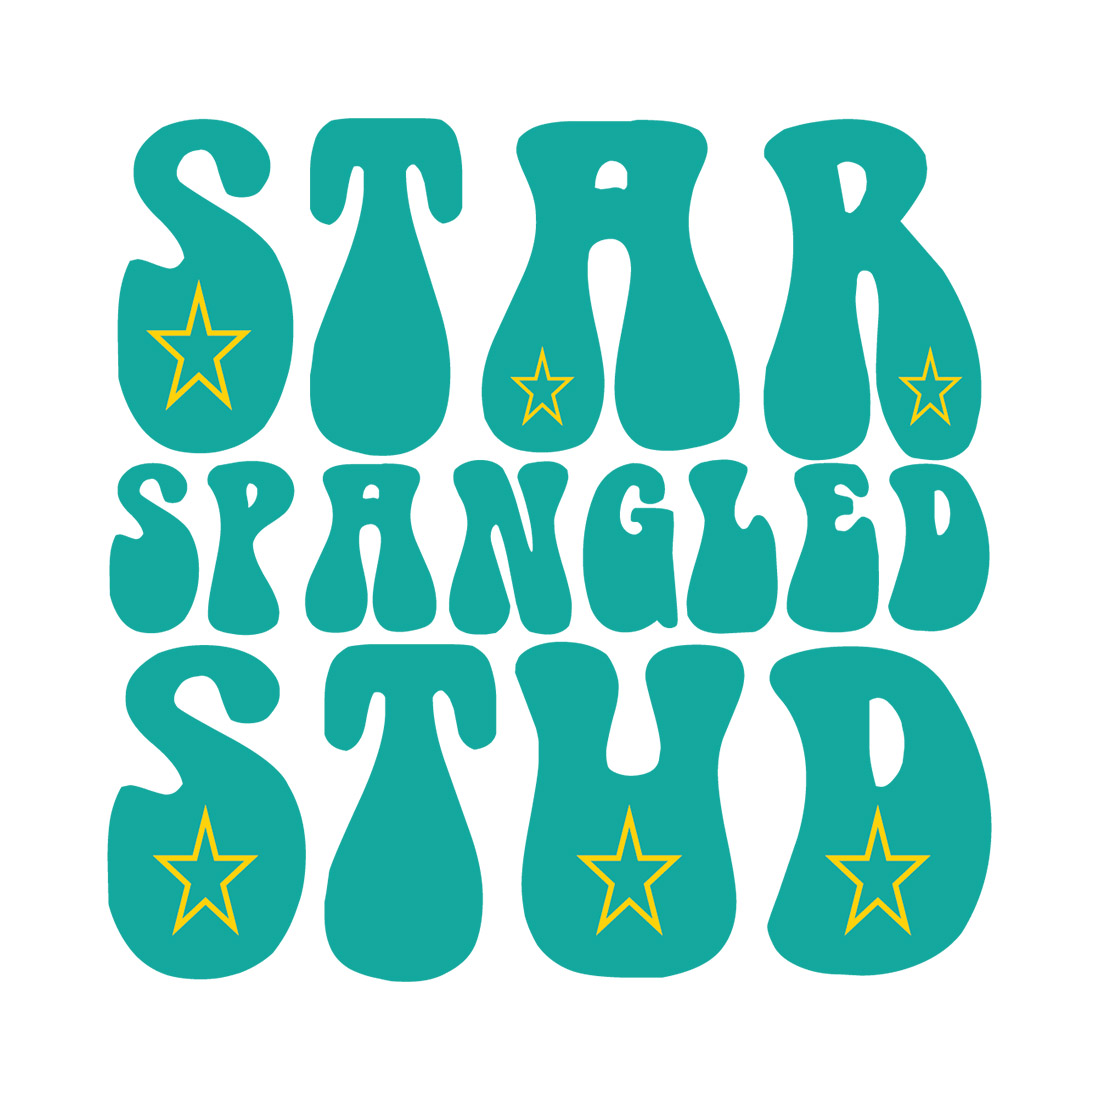 Star Spangled Stud preview image.